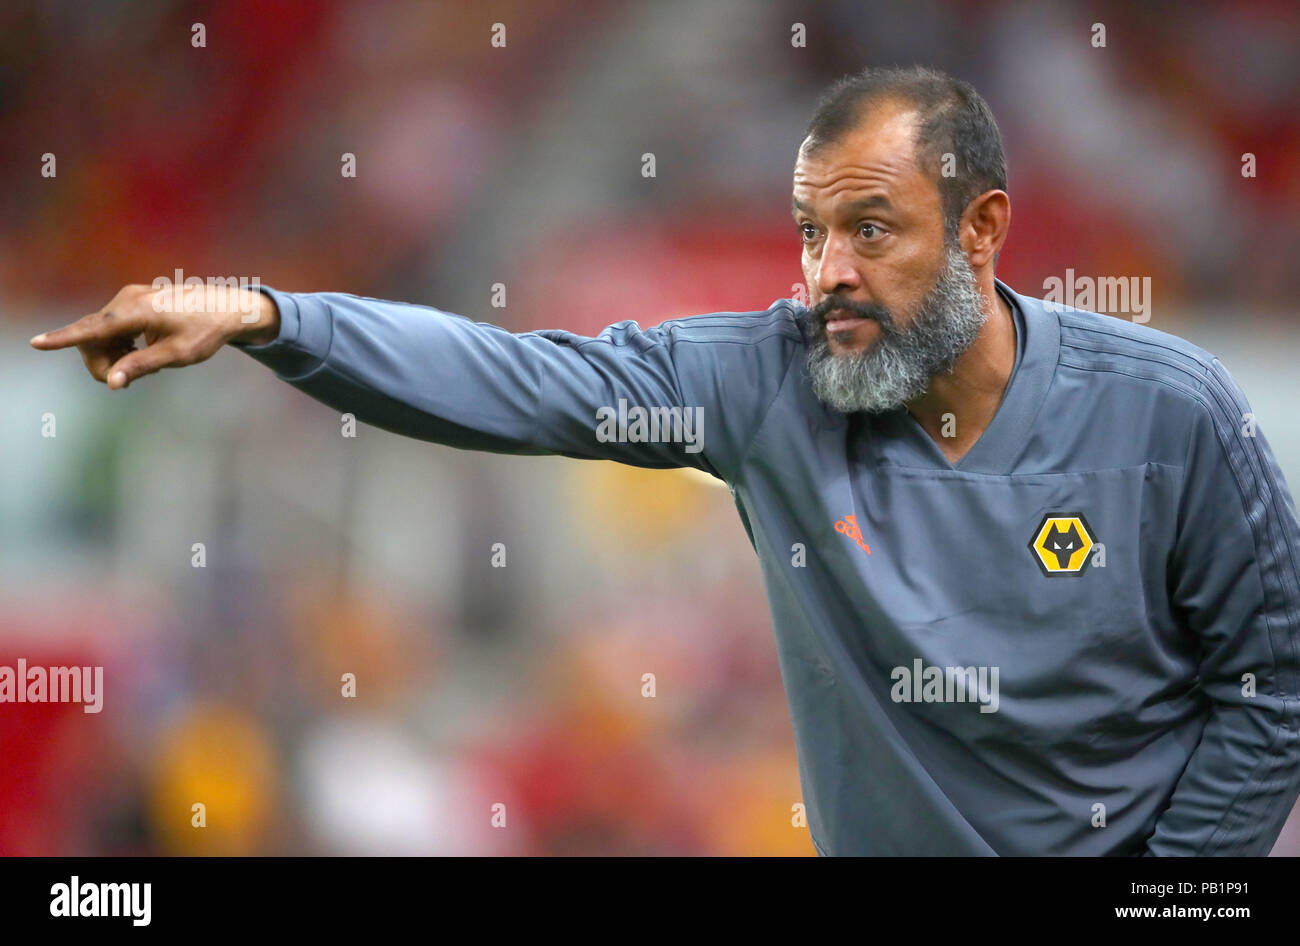 Wolverhampton Wanderers Manager Nuno EspÃ­rito Santo gestures during a pre season friendly match at The Bet365 Stadium, Stoke. PRESS ASSOCIATION Photo. Picture date: Wednesday July 25, 2018. Photo credit should read: Nick Potts/PA Wire. EDITORIAL USE ONLY No use with unauthorised audio, video, data, fixture lists, club/league logos or "live" services. Online in-match use limited to 75 images, no video emulation. No use in betting, games or single club/league/player publications. Stock Photo